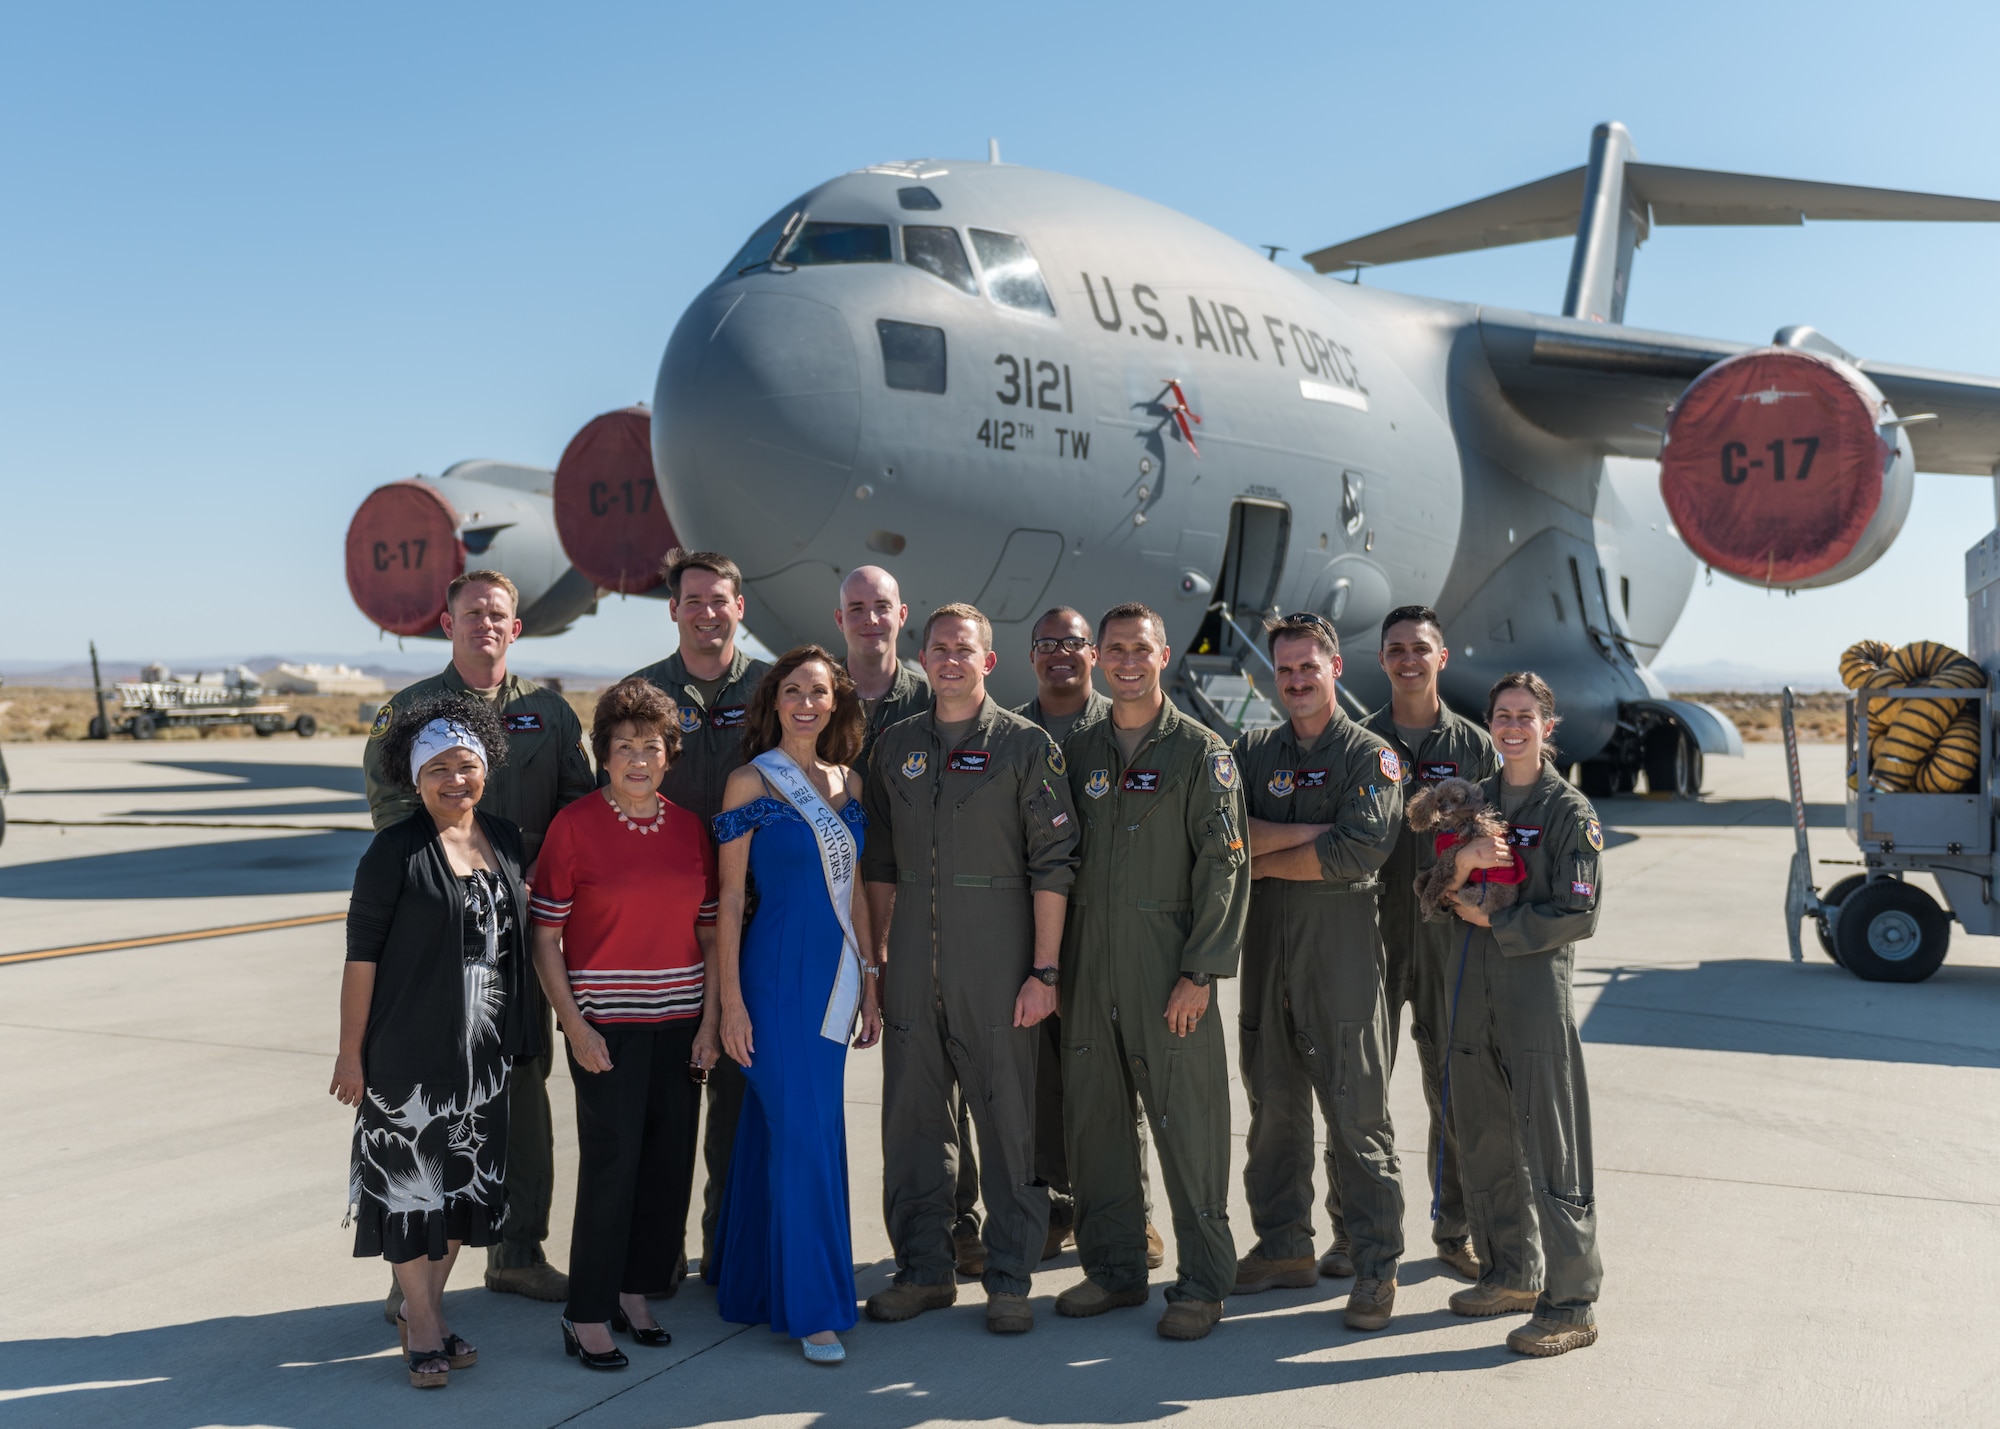 The reigning Mrs. California Universe, Lynelle DeRoo-Marcos, the wife of Perry Marcos, a Standards/Evaluation and training technician with the 418th Flight Test Squadron, poses for a photo with members of the 418th FLTS during her visit to the squadron at Edwards Air Force Base, California, Aug. 2. (Air Force photo by Bryce Bennett)